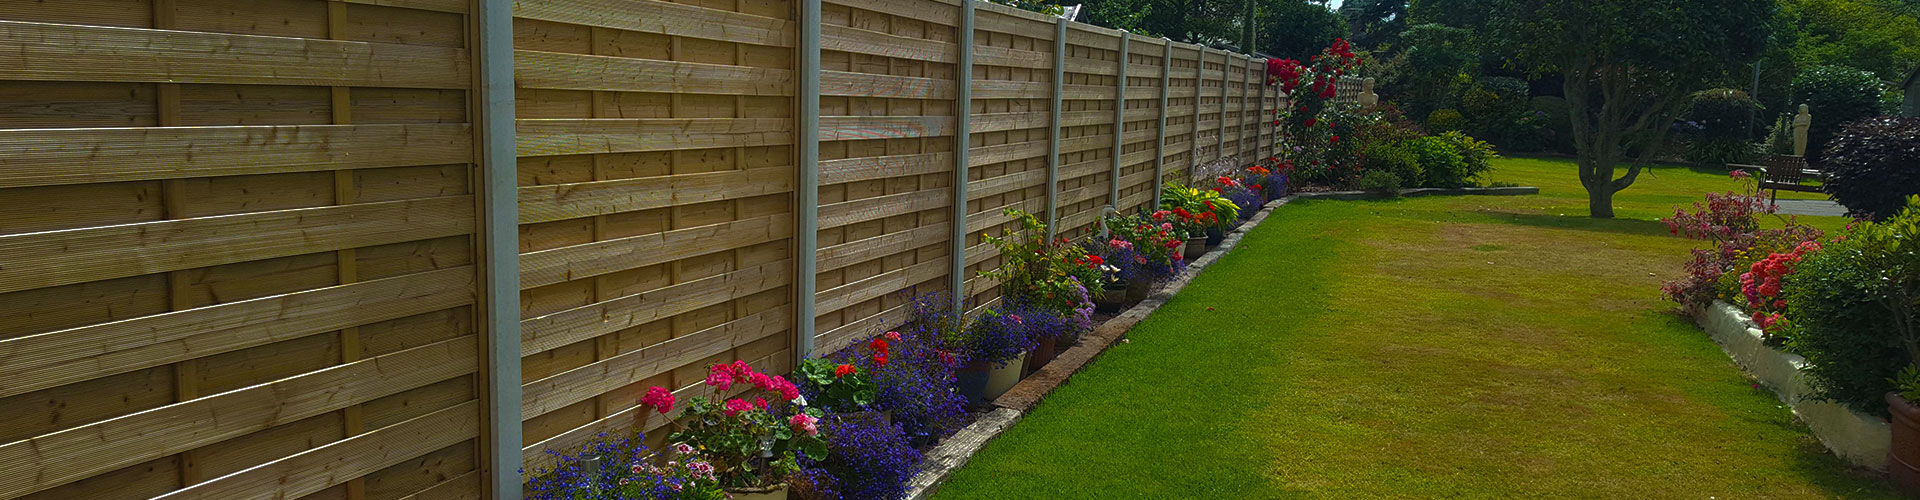 Guernsey garden fencing header photo of a beautiful wooden fence with concrete posts.